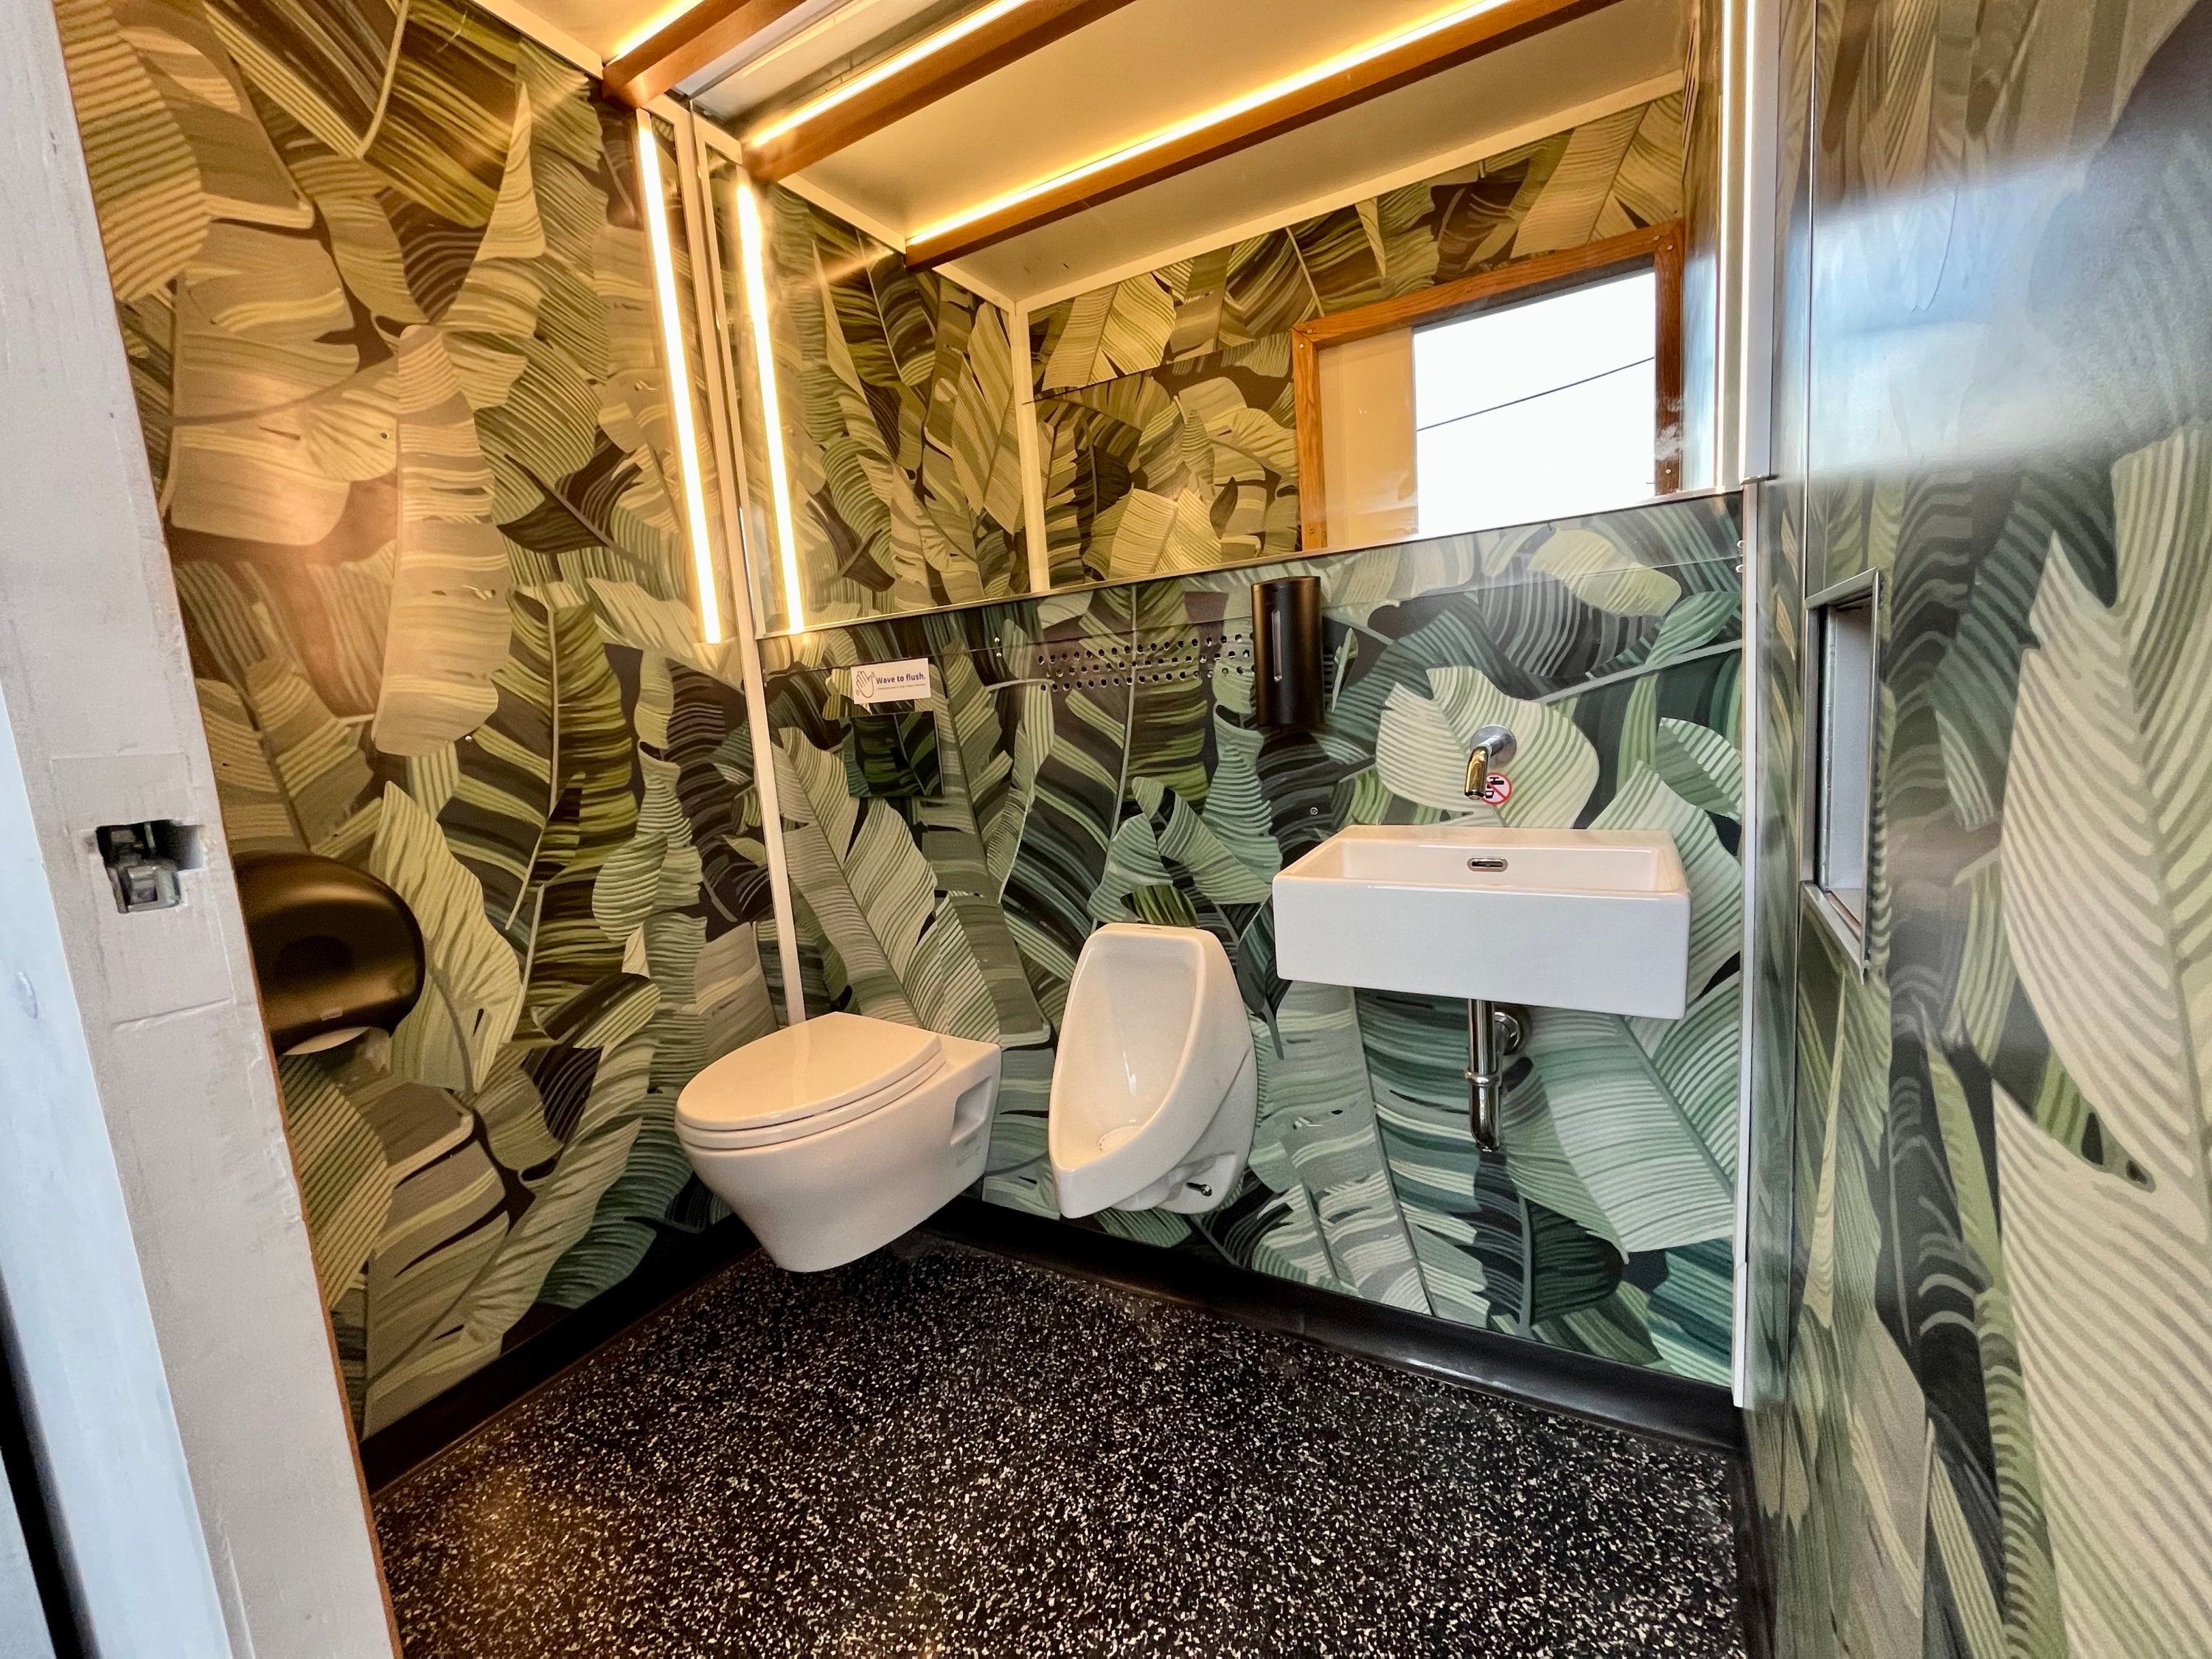 Inside a "Throne," a portable bathroom created by Throne Labs. There's a toilet, urinal, sink, and mirror, and the walls are decorated with a jungle print.